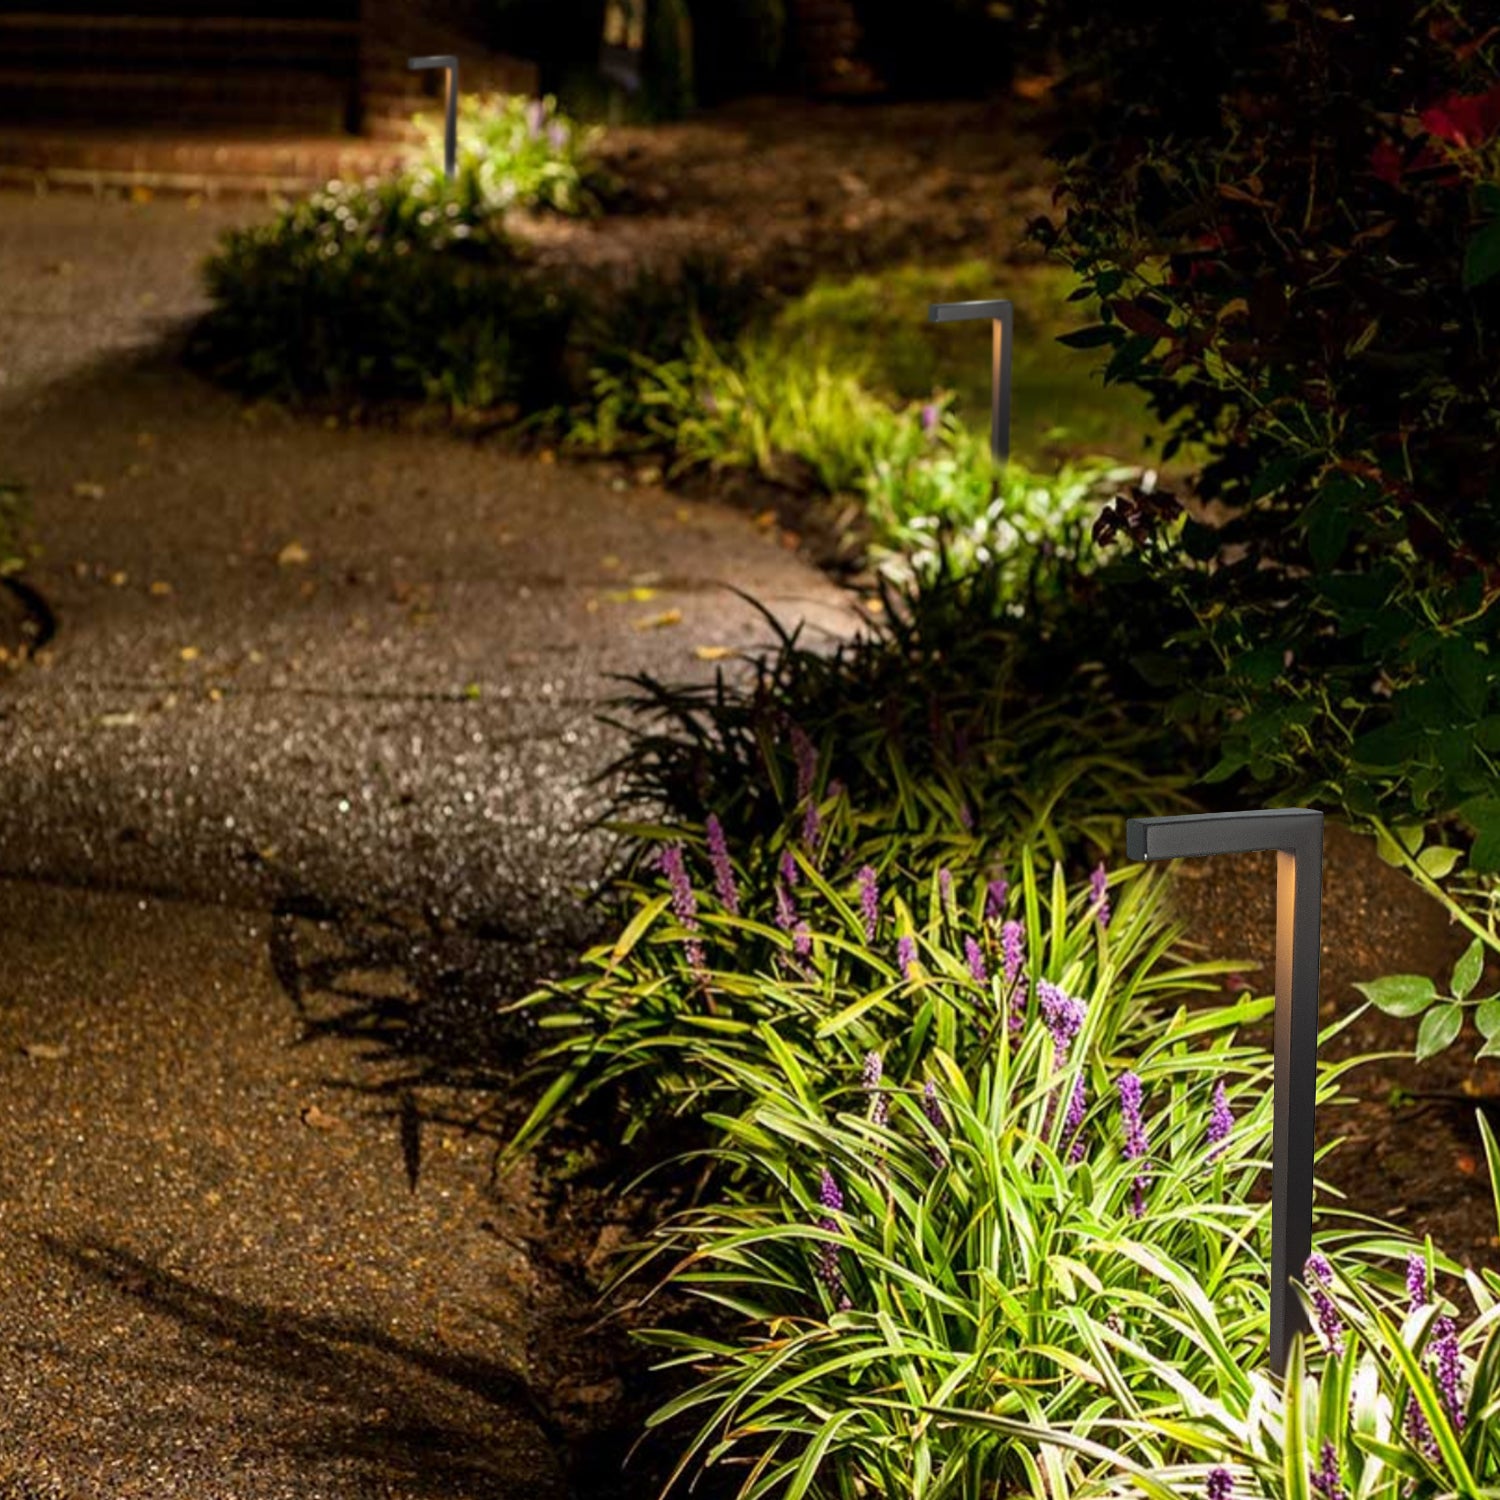 12V LED low voltage solid brass outdoor lights illuminating a garden path with greenery and purple flowers, part of COLOER's outdoor lighting solutions.